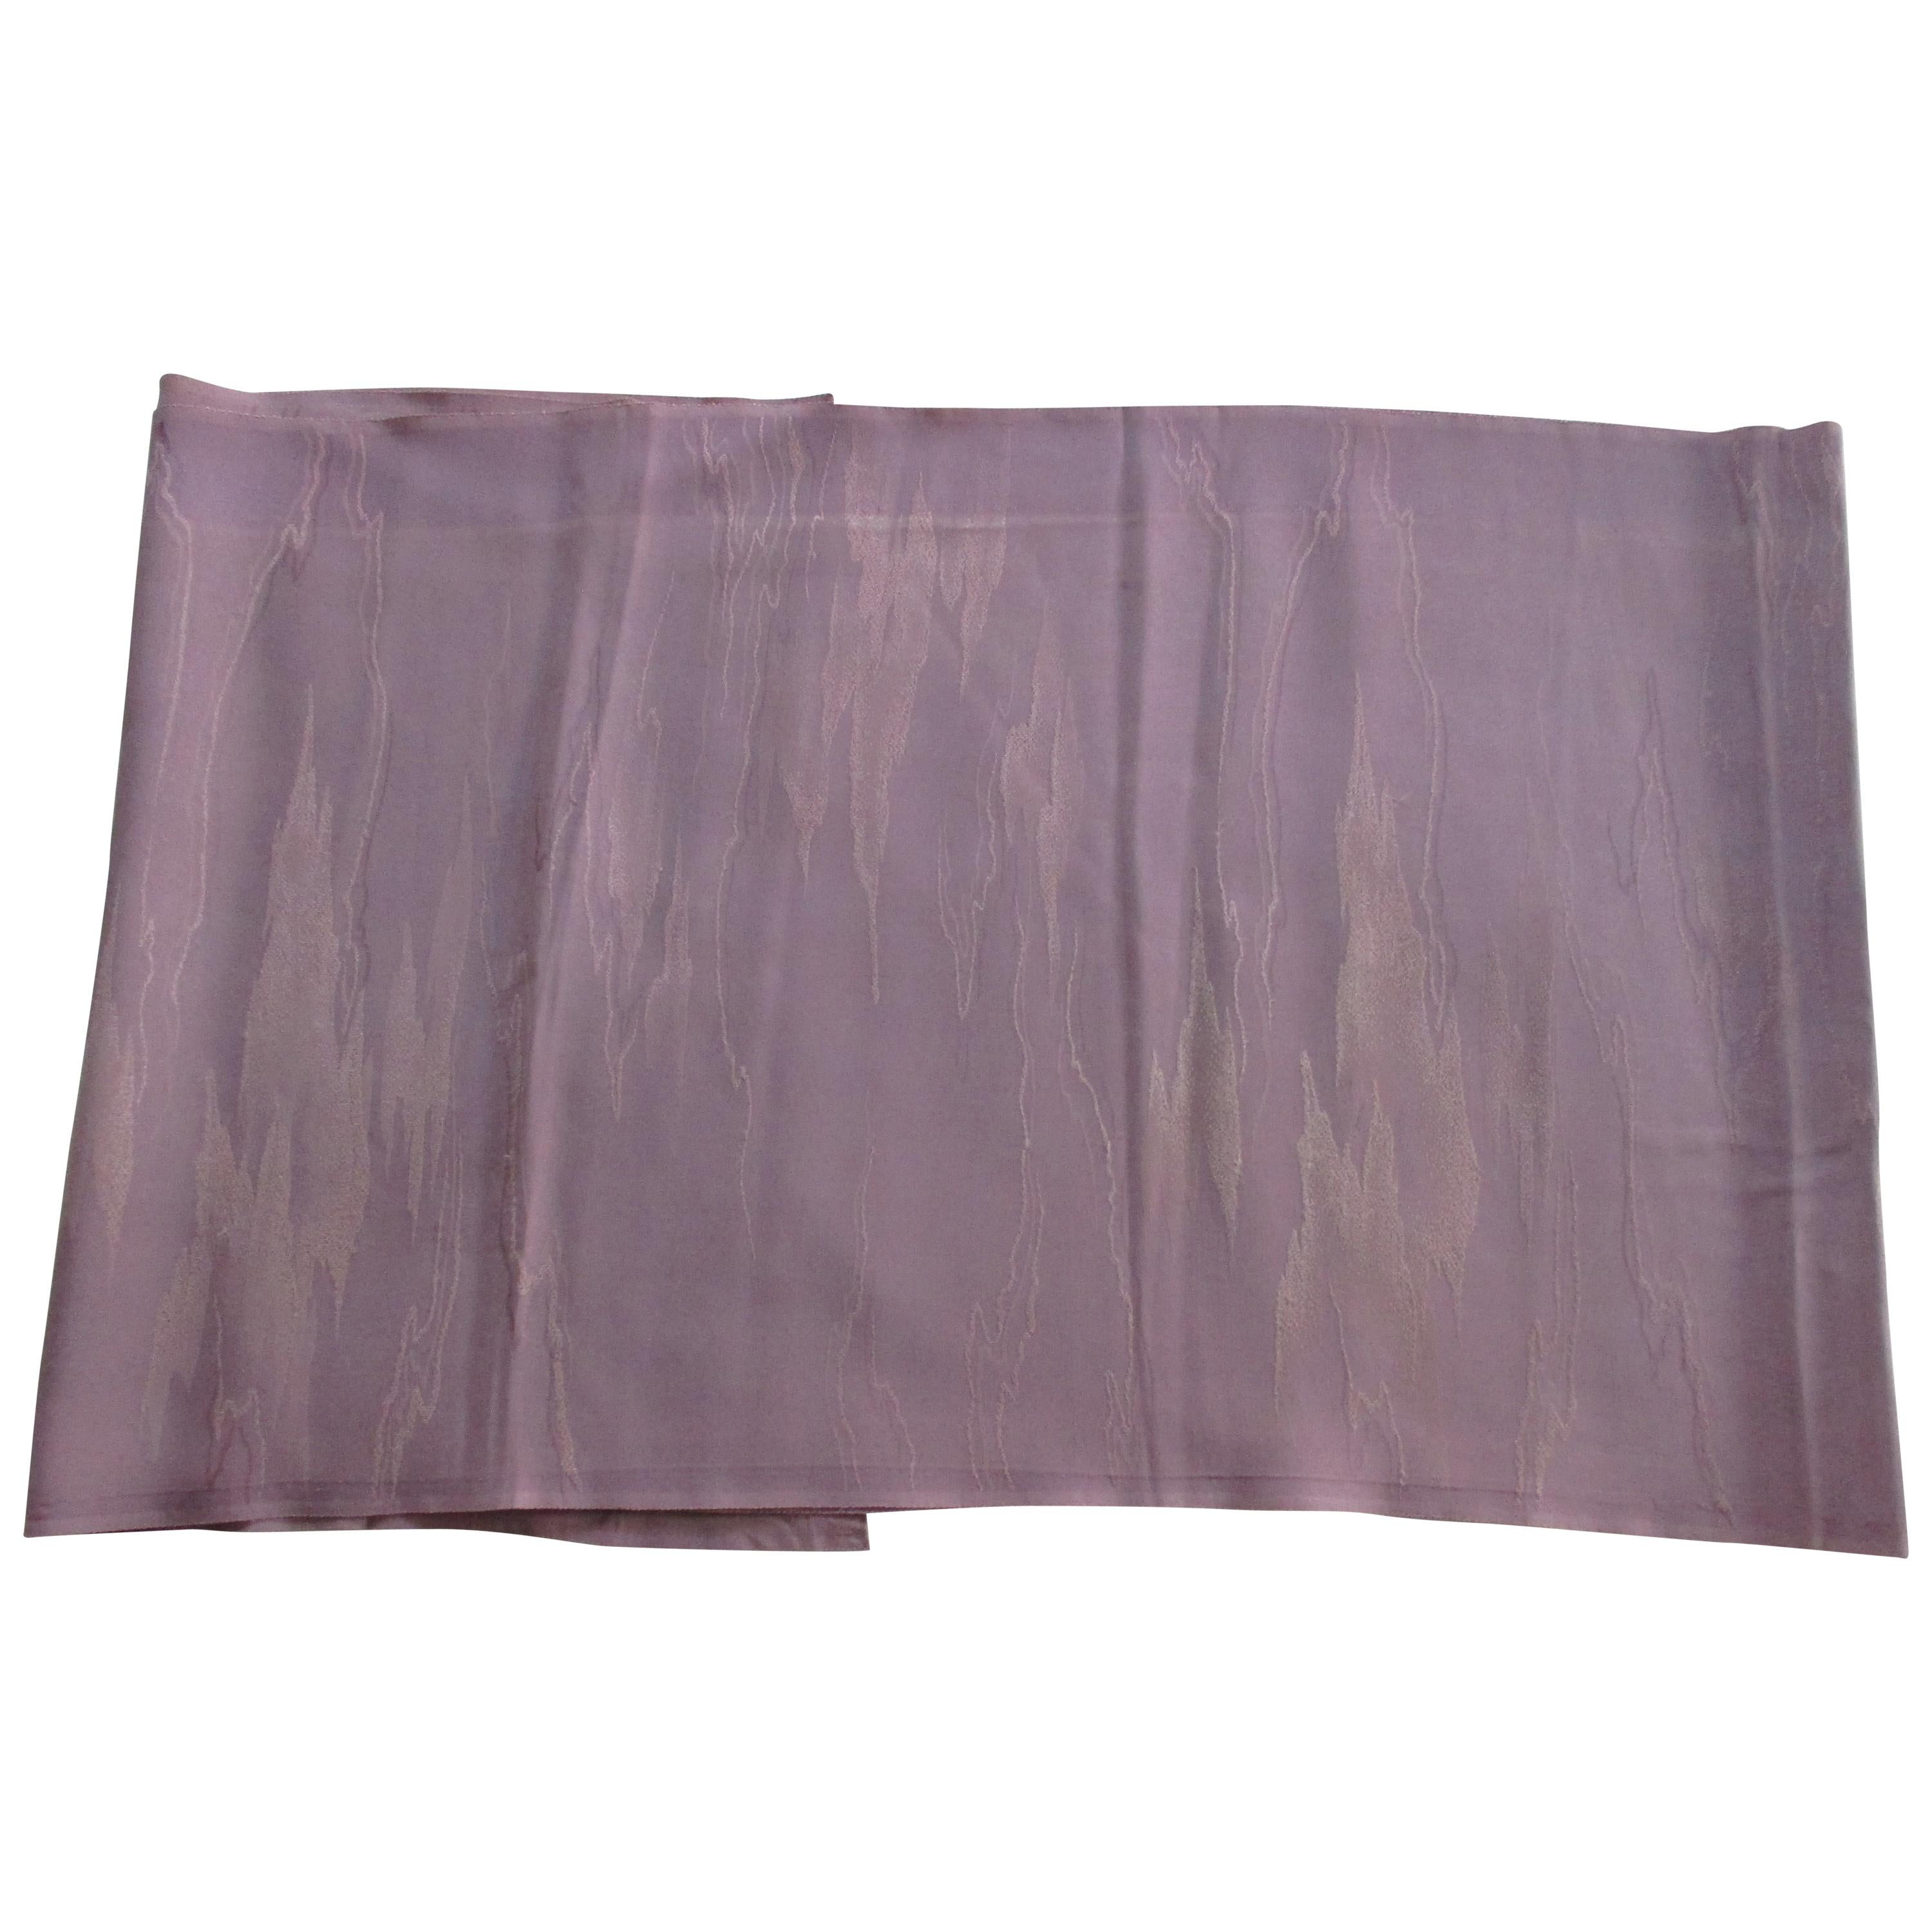 Vintage Silk Obi Textile with Tone-on-Tone Lilac Clouds For Sale